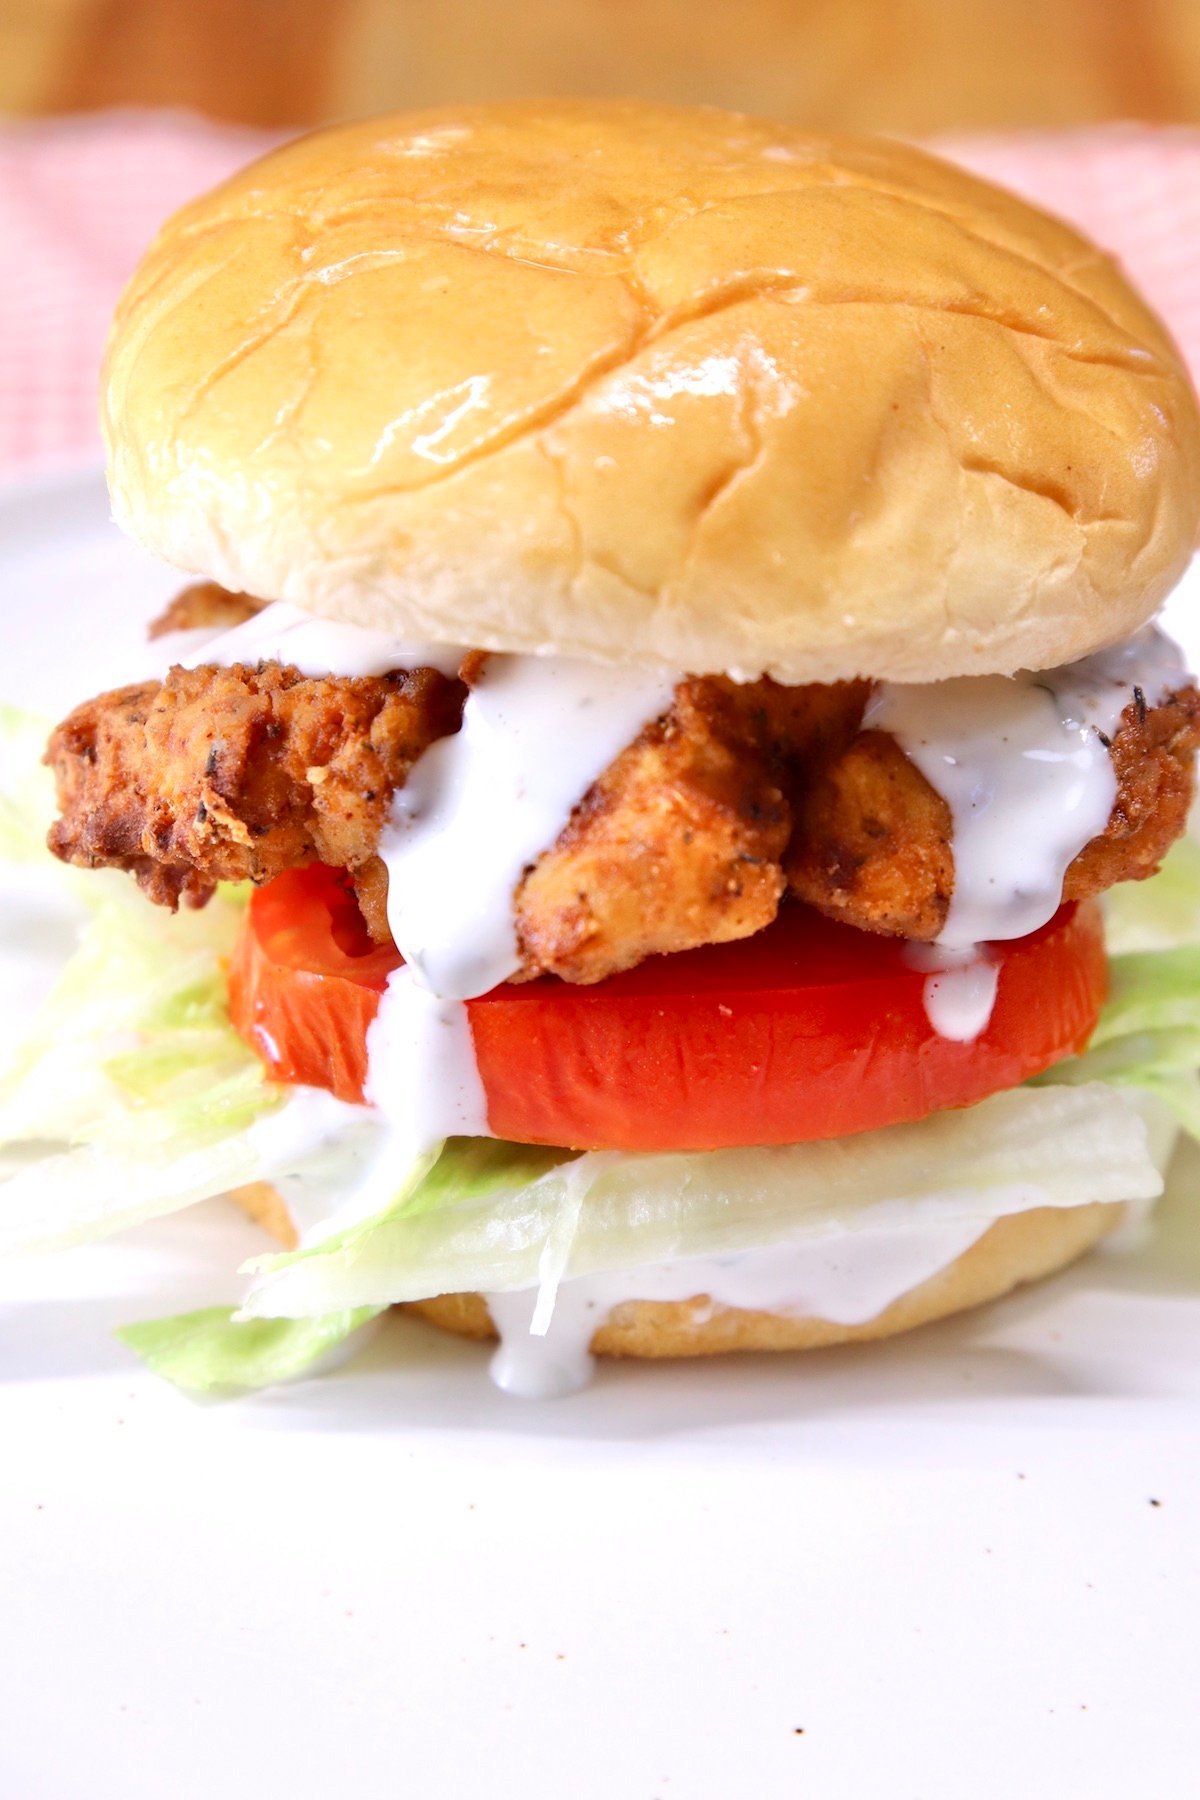 Crispy chicken sandwich with lettuce, tomato and ranch dressing - close up